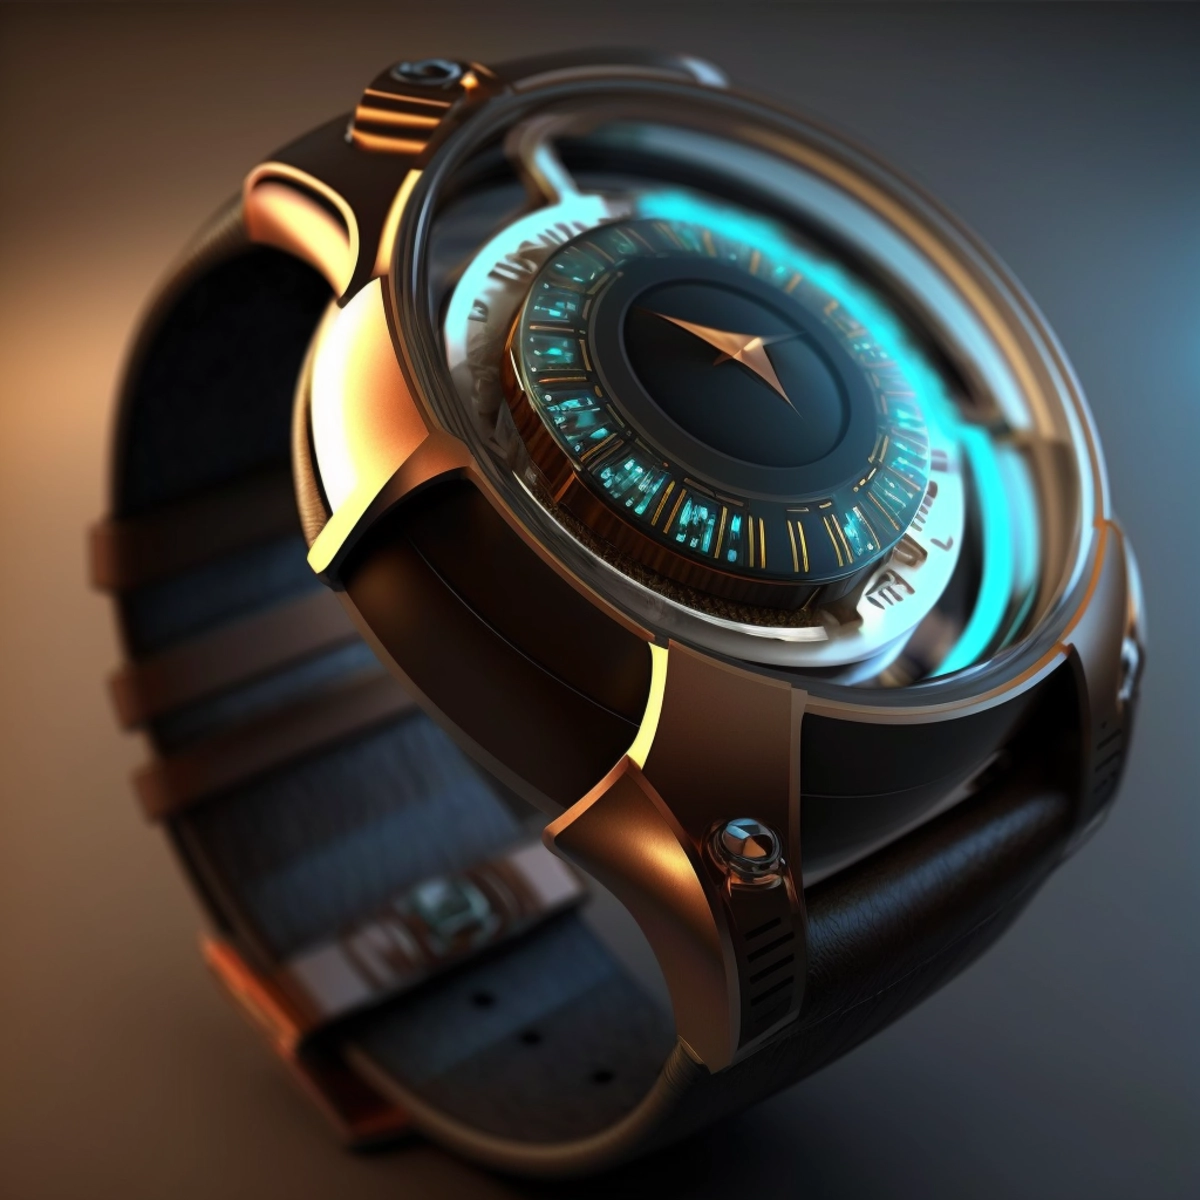 A futuristic concept design of a smartwatch with holographic display, blending elegance with cutting-edge technology